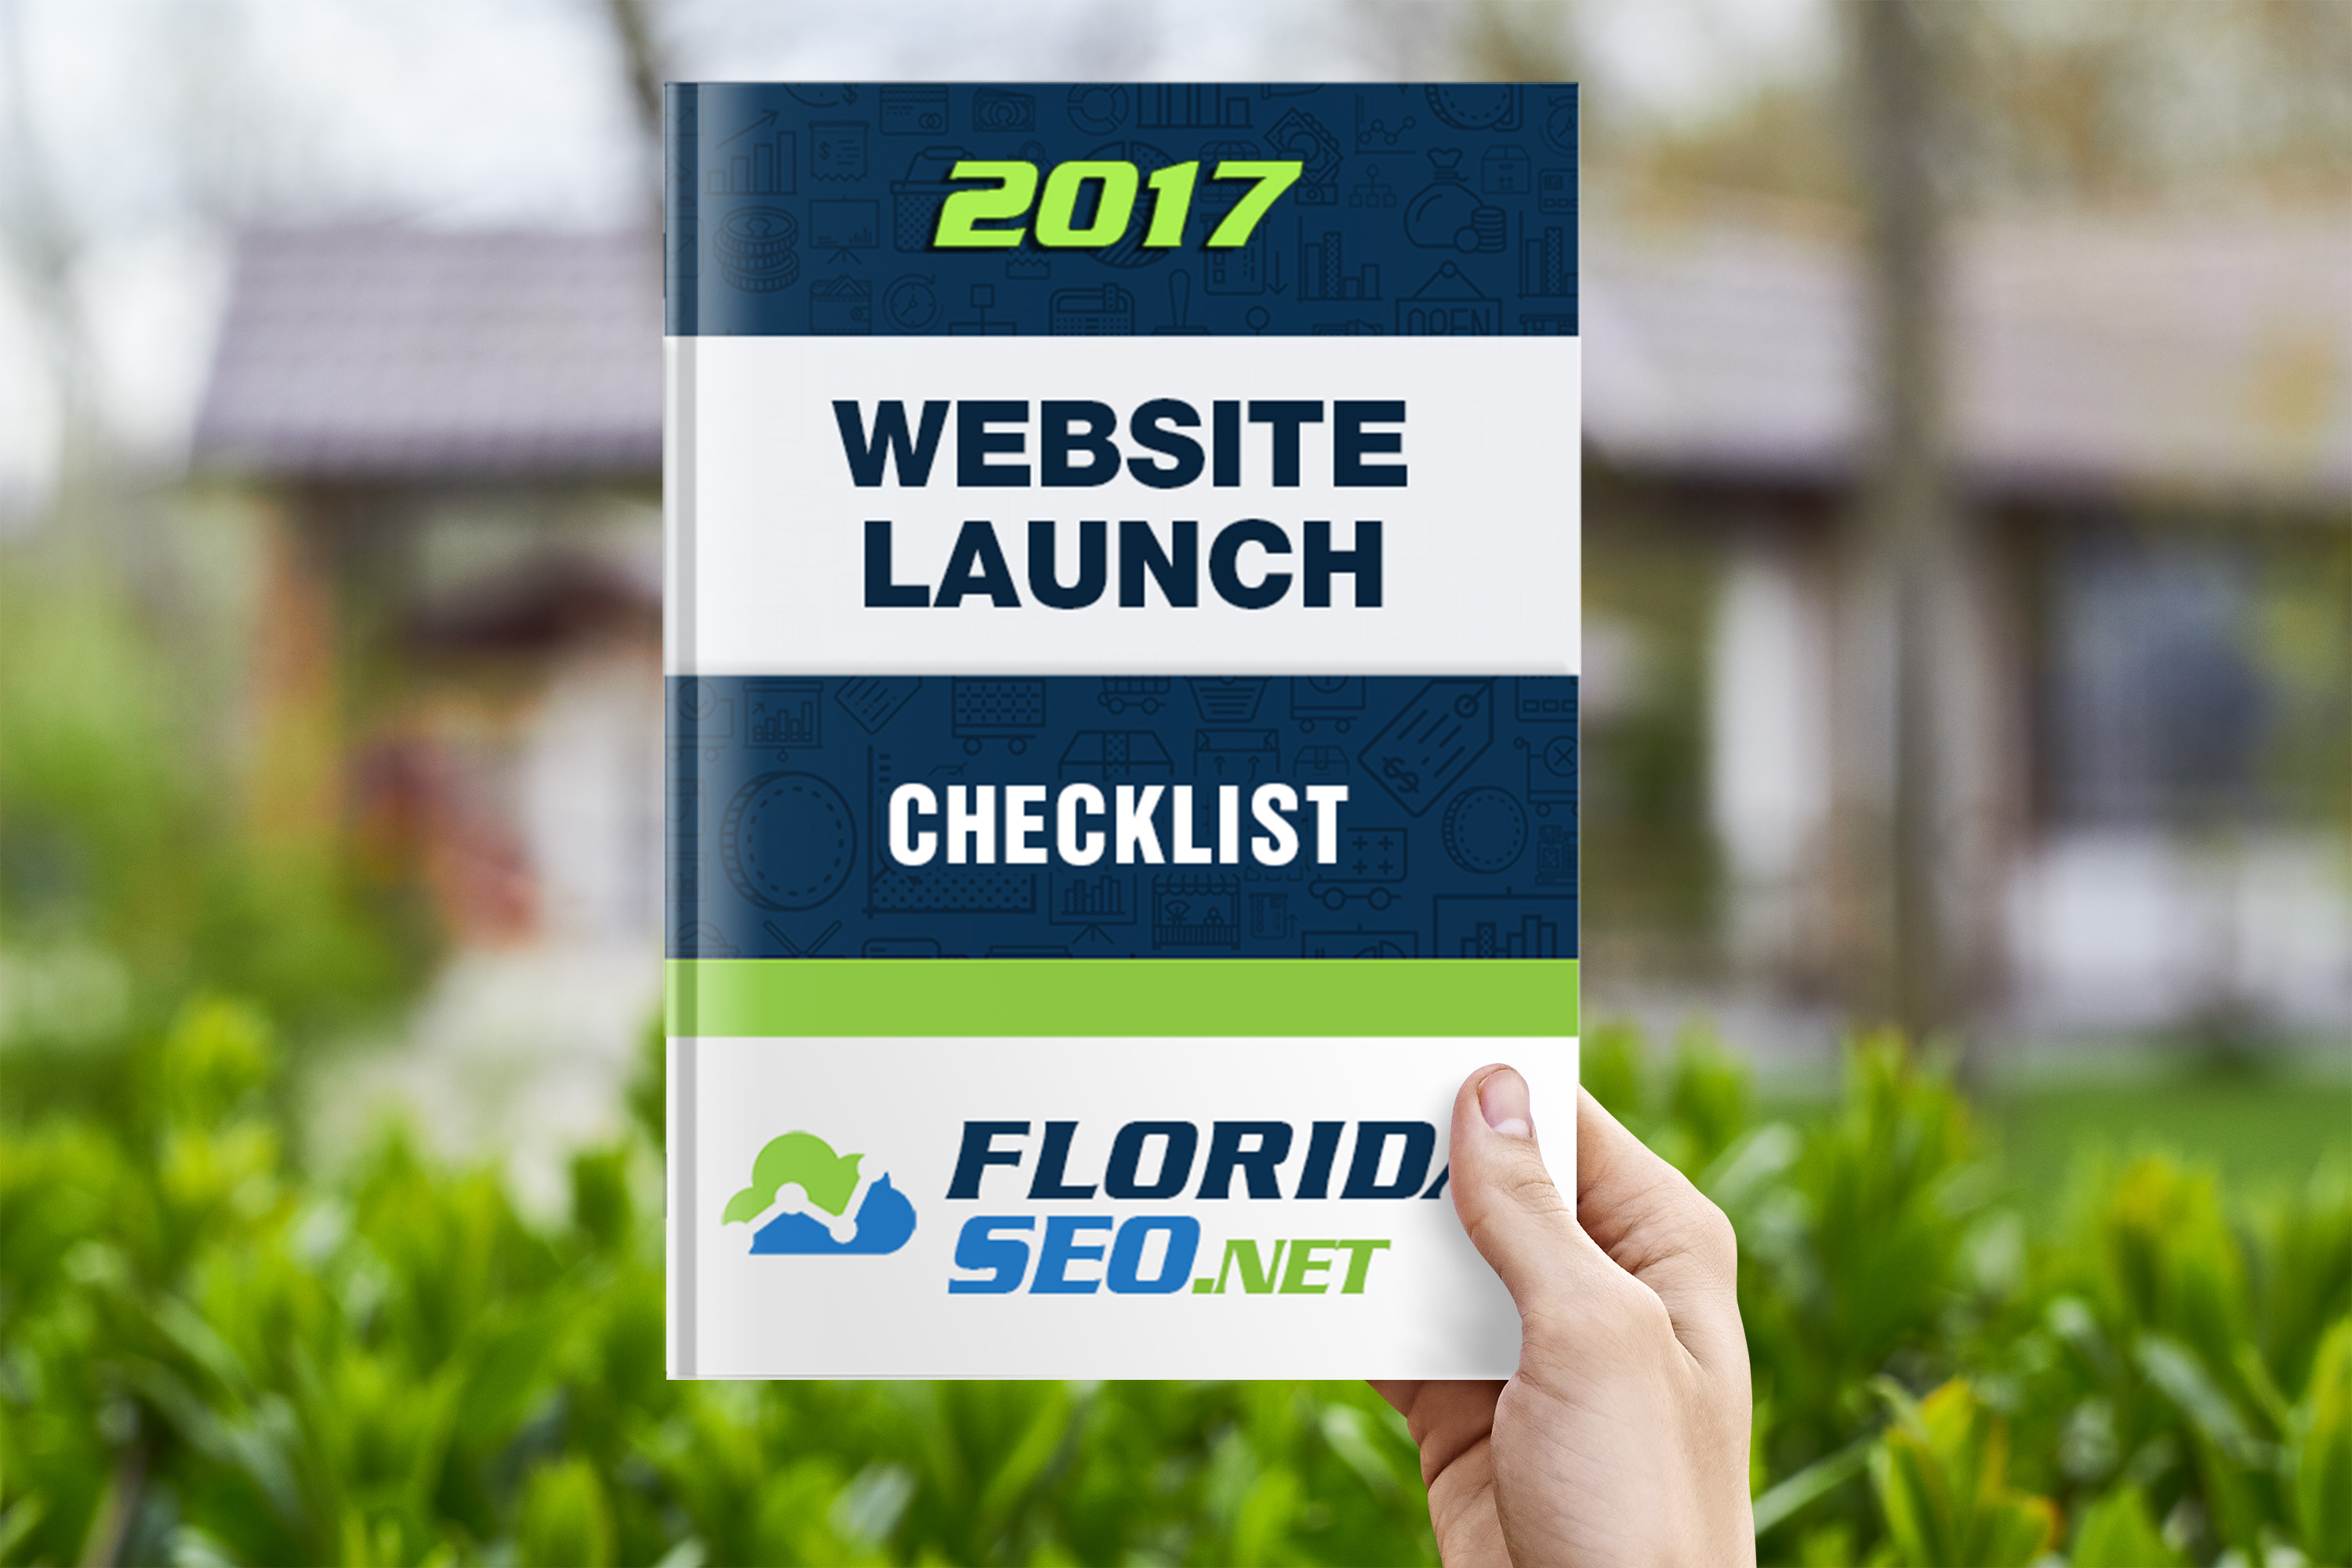 Step-by-step on how to launch a pro website!